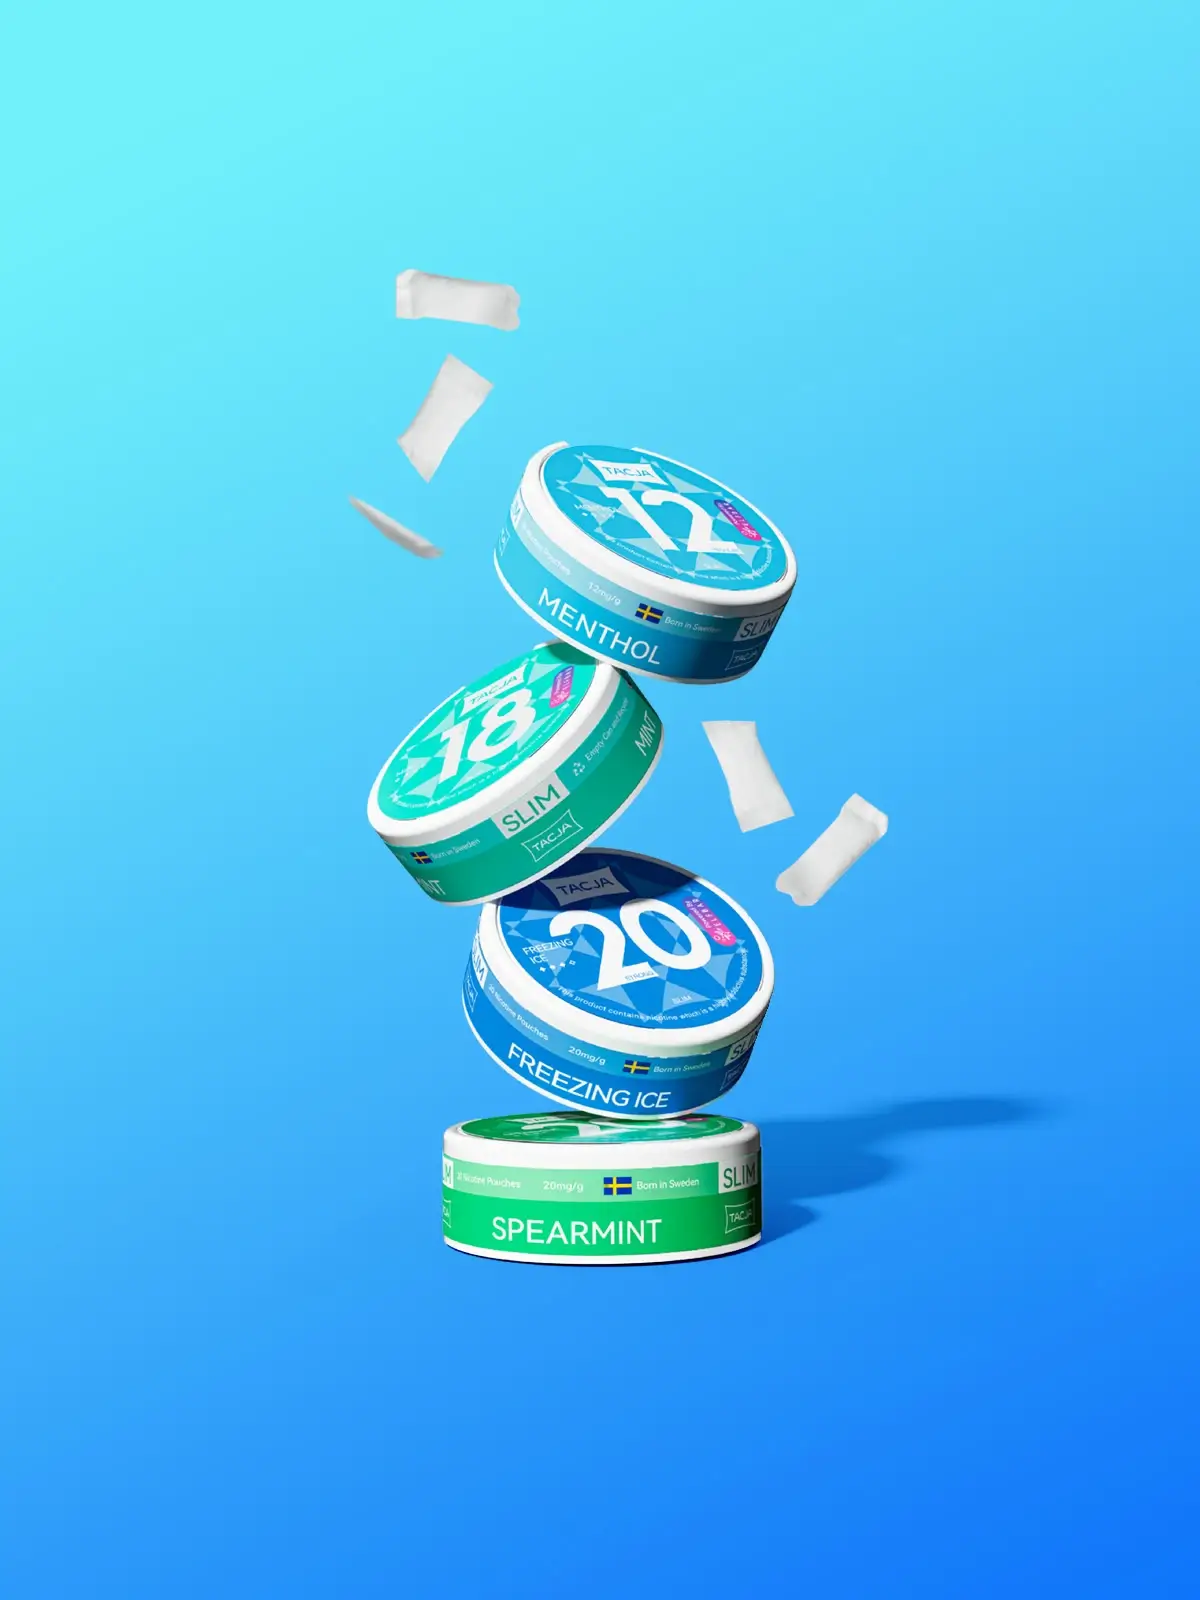 Four cans of ELF BAR TAQJA floating in front of a light blue background